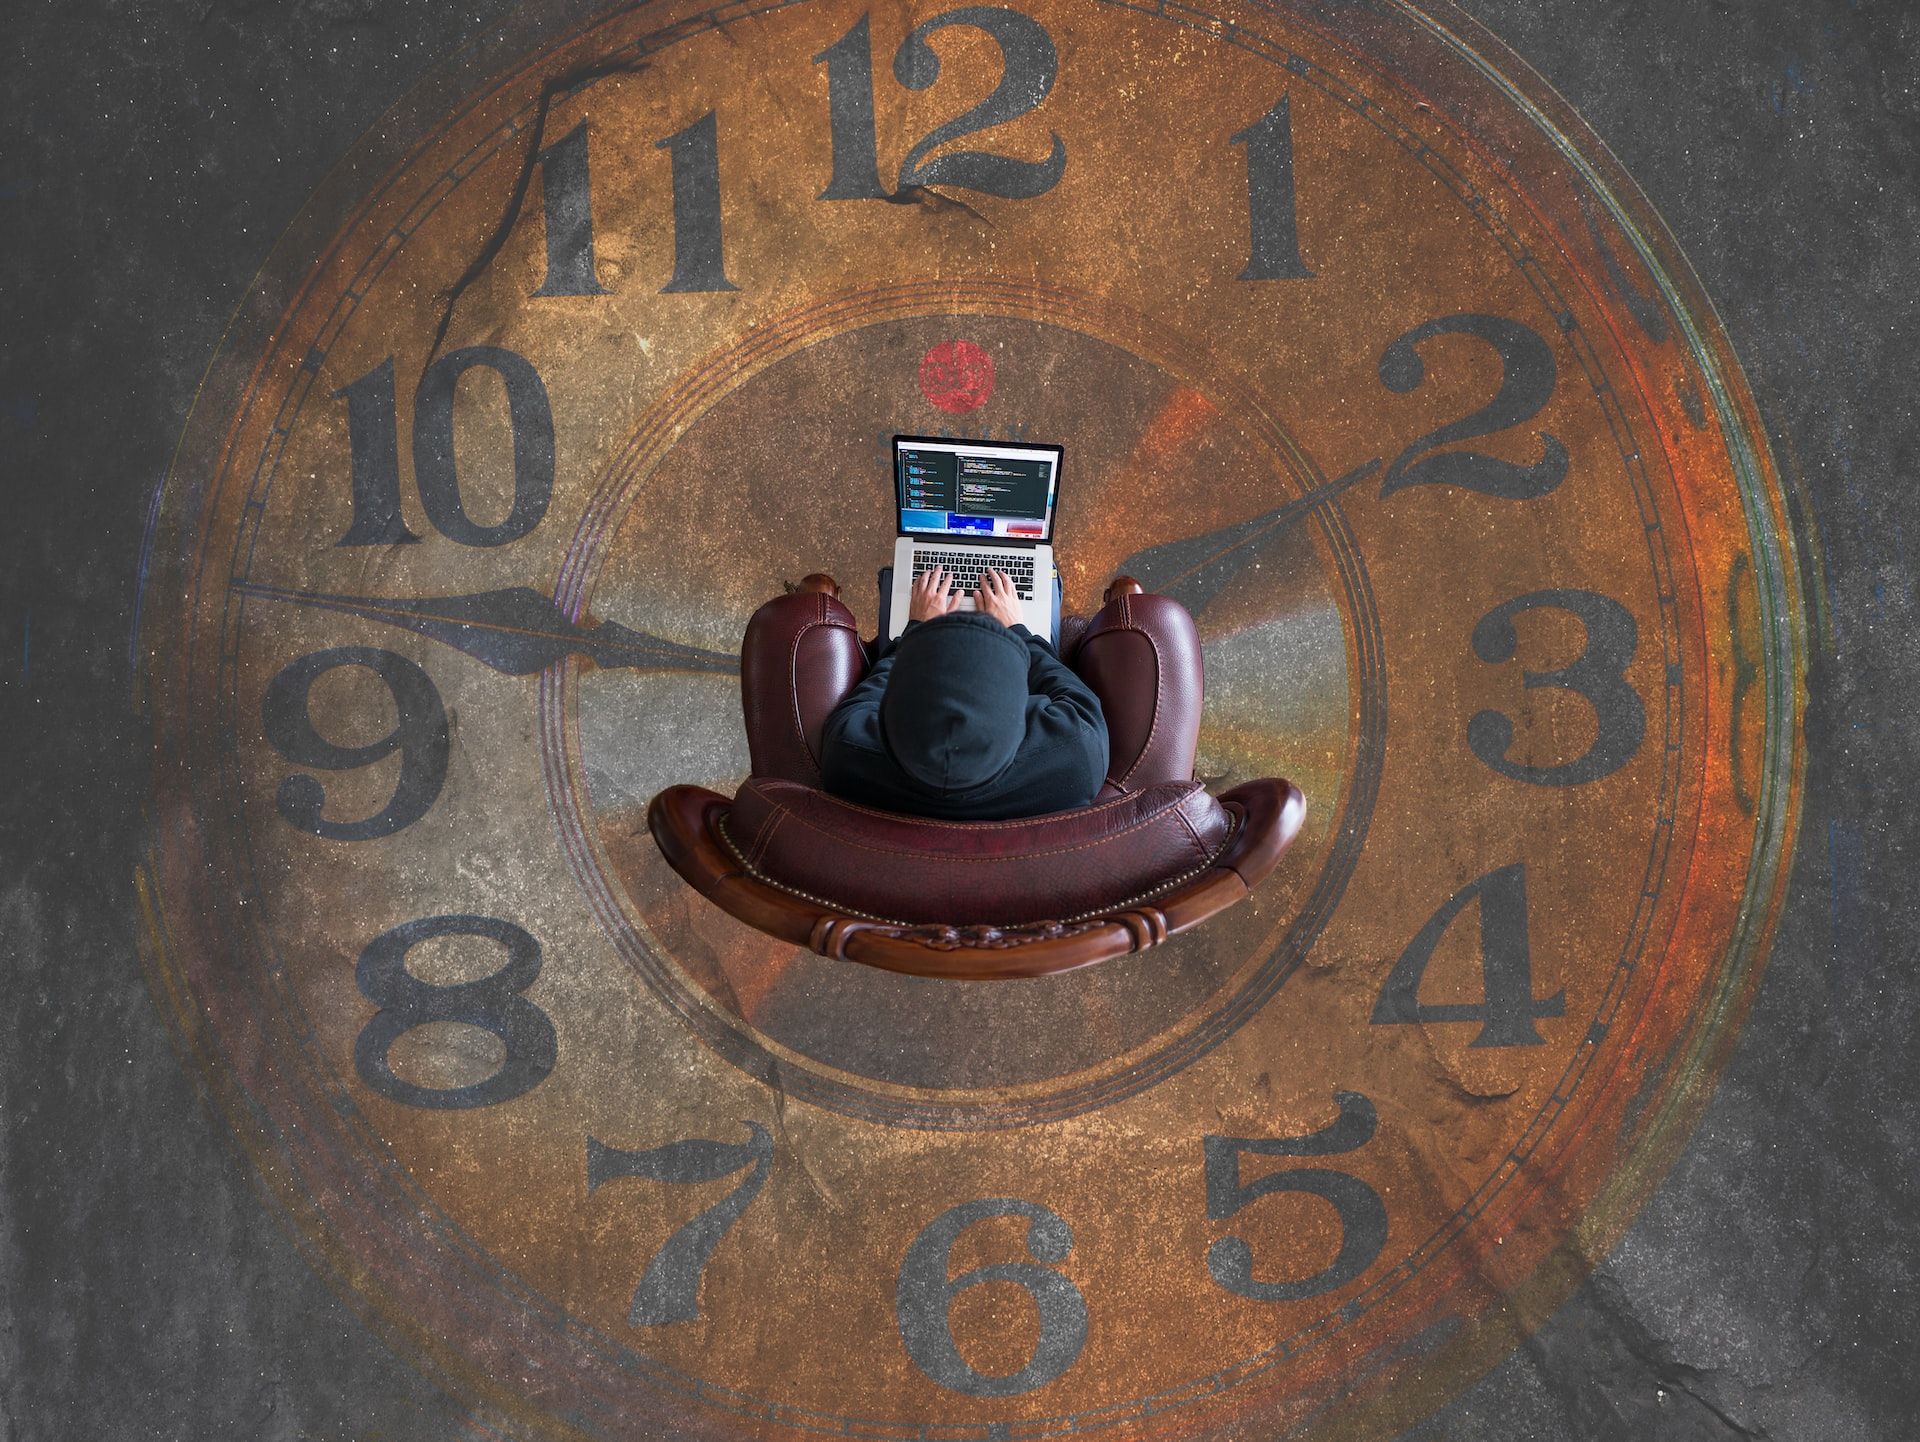 Person sitting on leather chair in the middle of a clock on the floor using a laptop